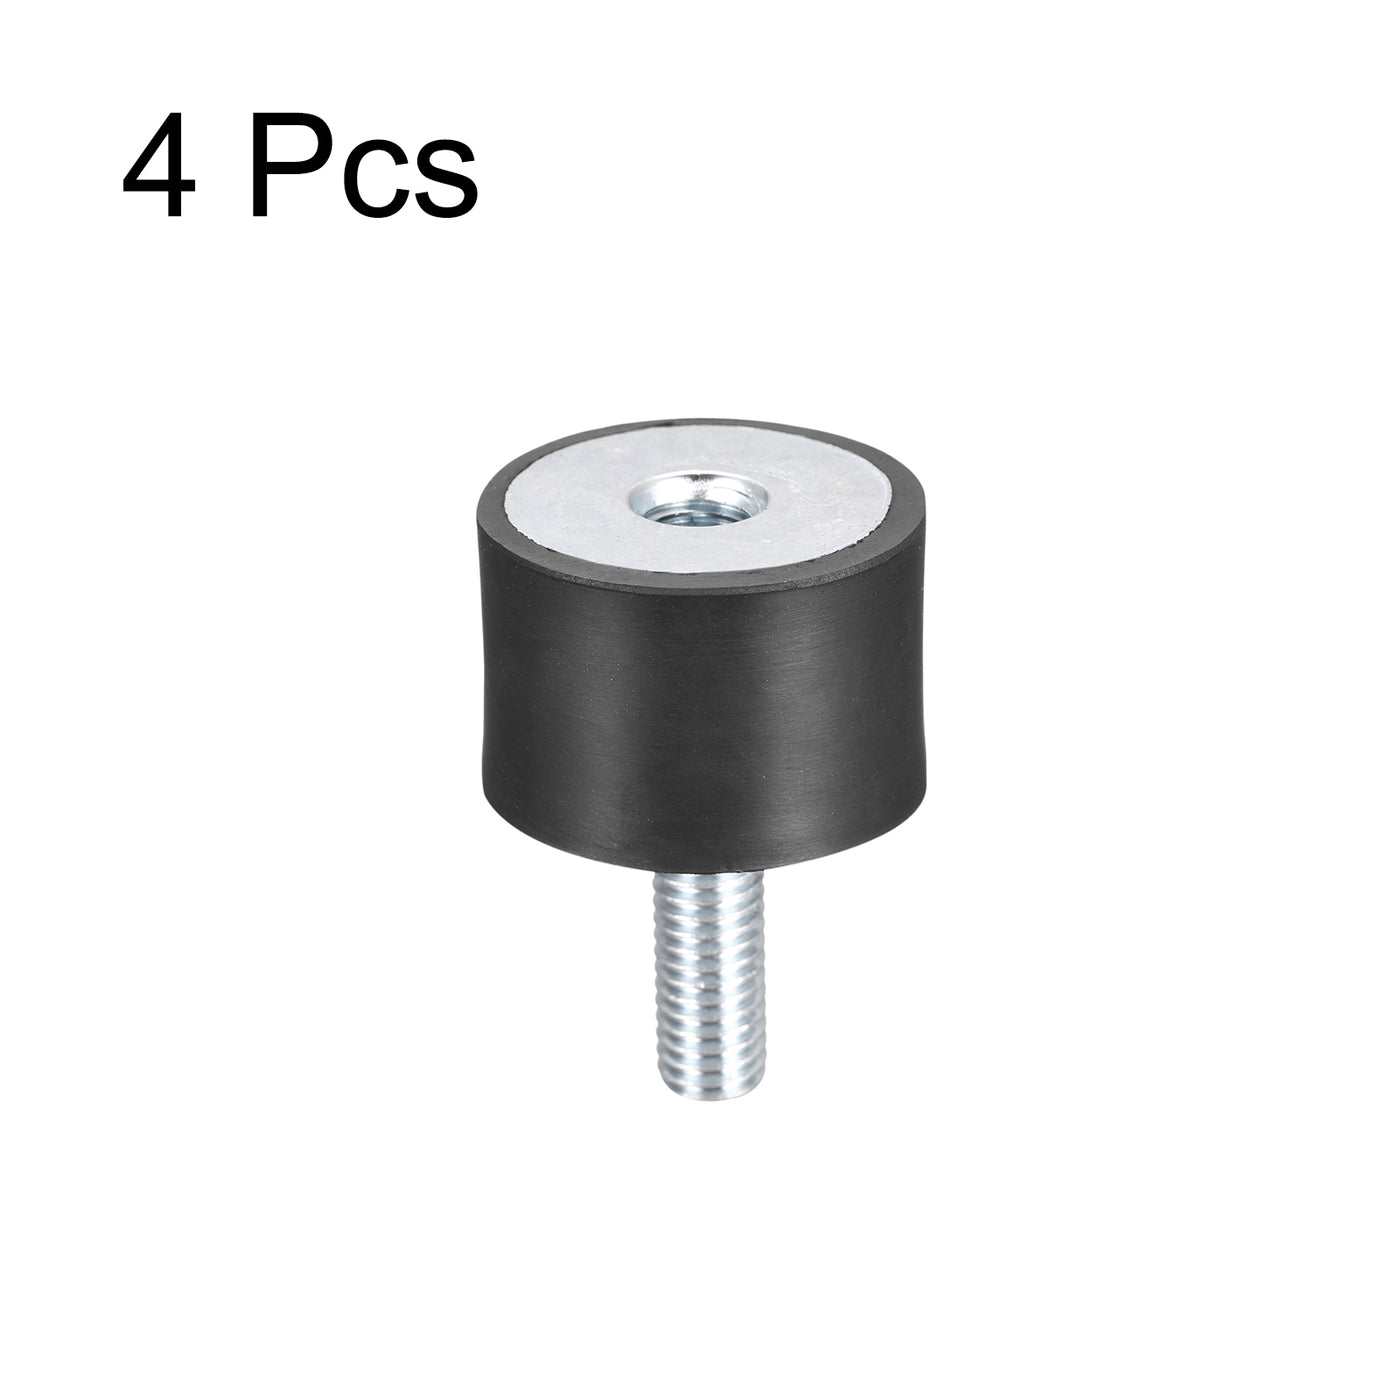 uxcell Uxcell Rubber Mount 4pcs M8 Male/Female Vibration Isolator Shock Absorber, D30mmxH20mm